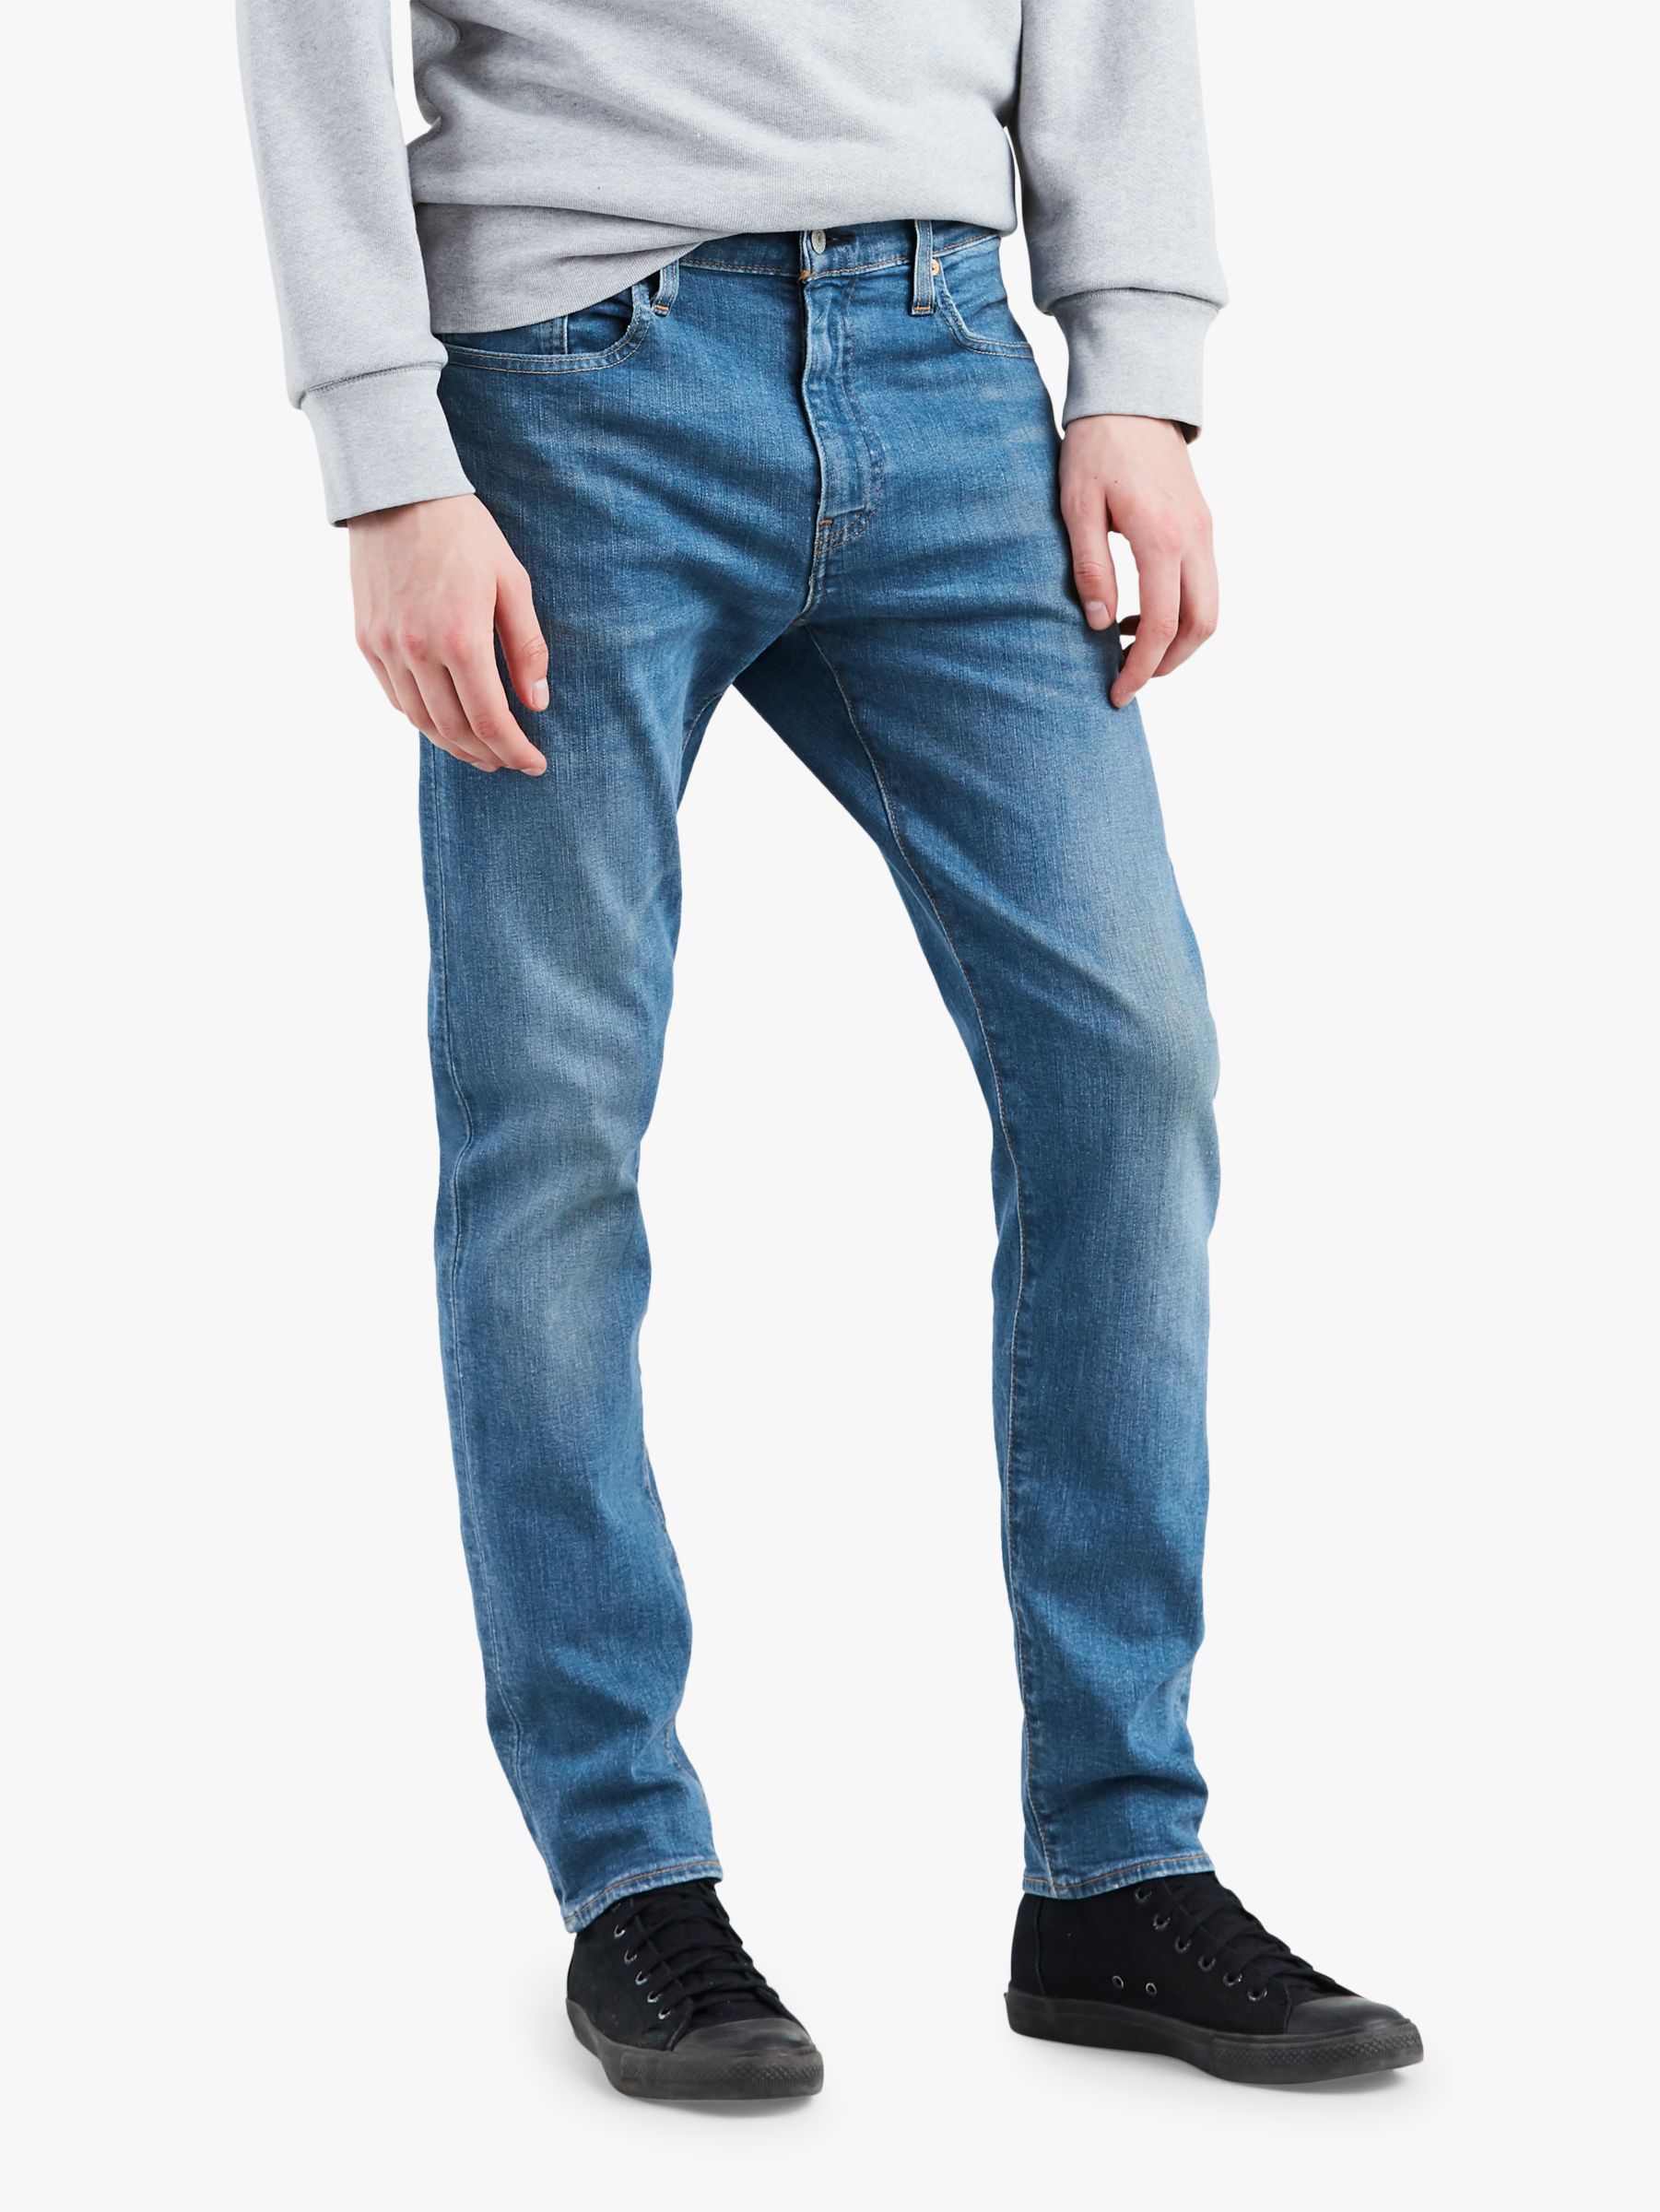 Levi's 512 Slim Tapered Jeans, Four 